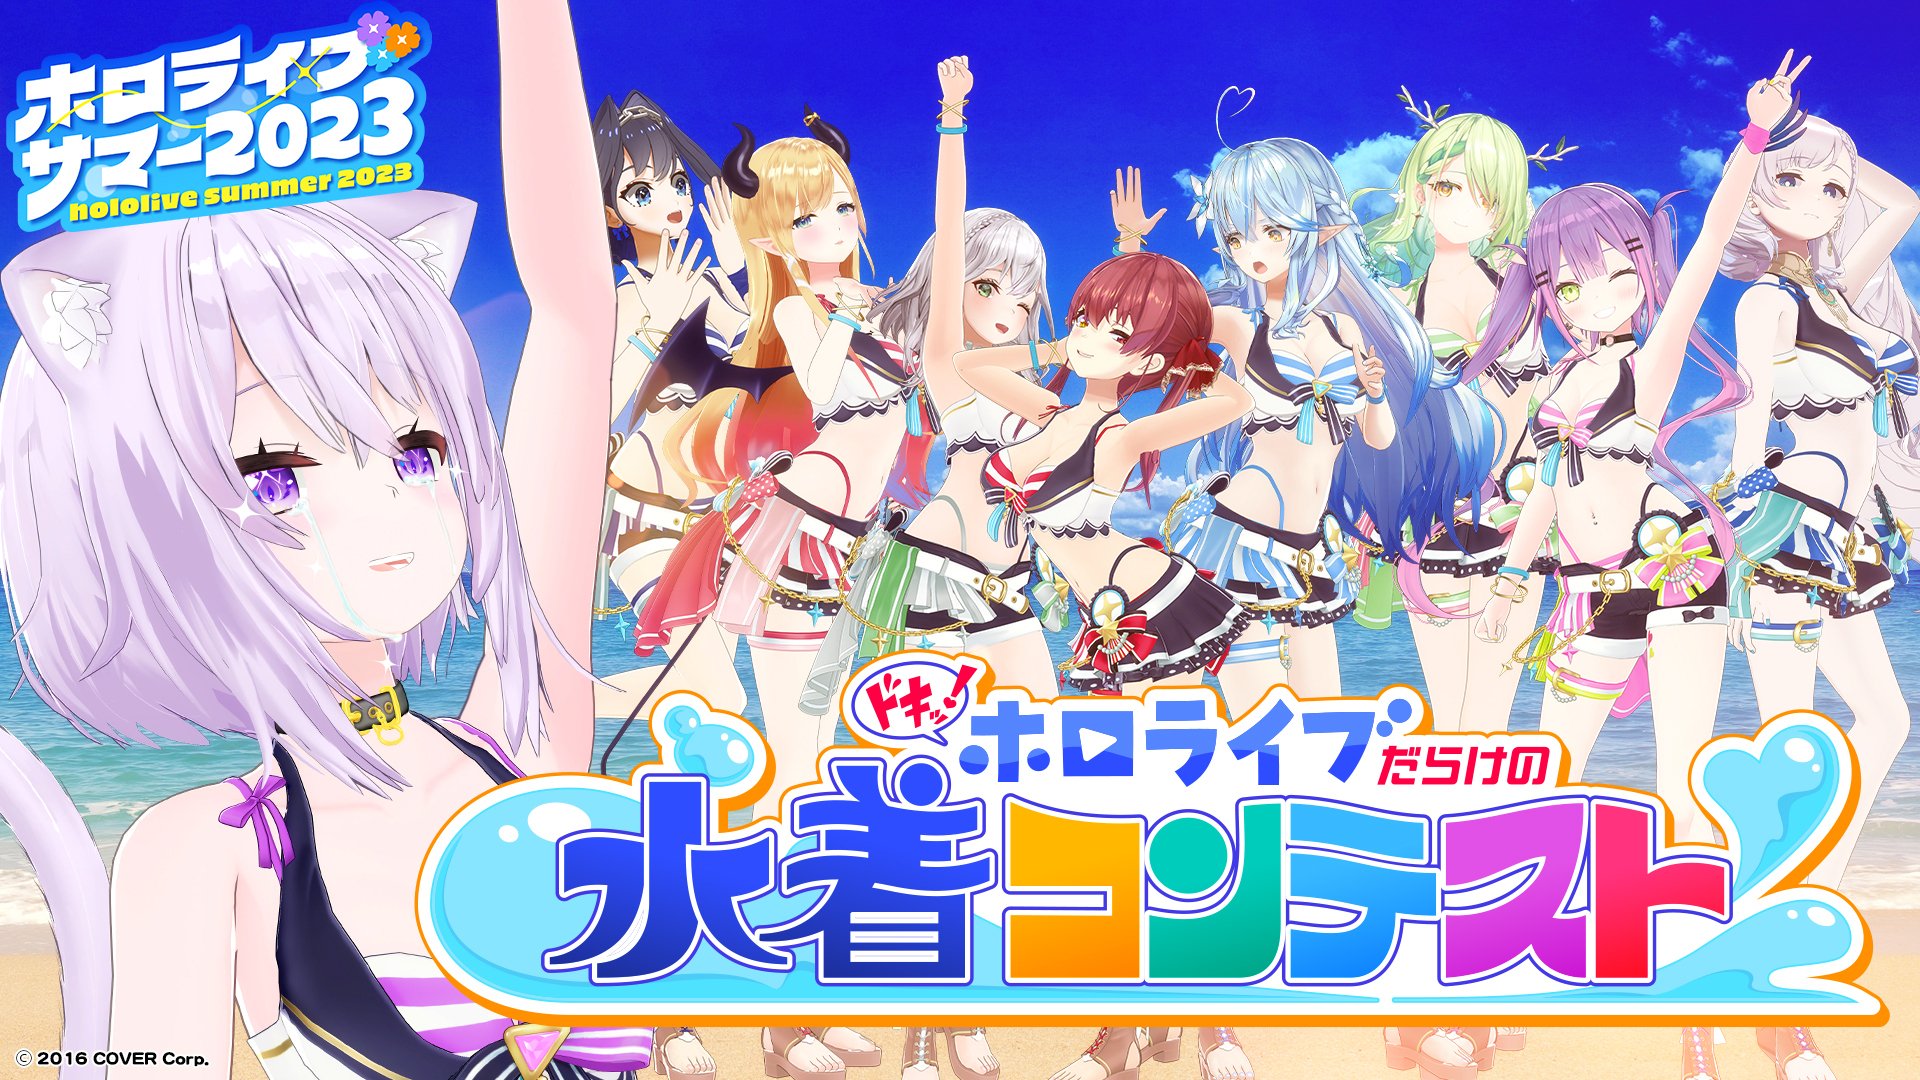 Here's the Hololive Vtuber Summer 2023 Swimsuit Karaoke Relay Schedule